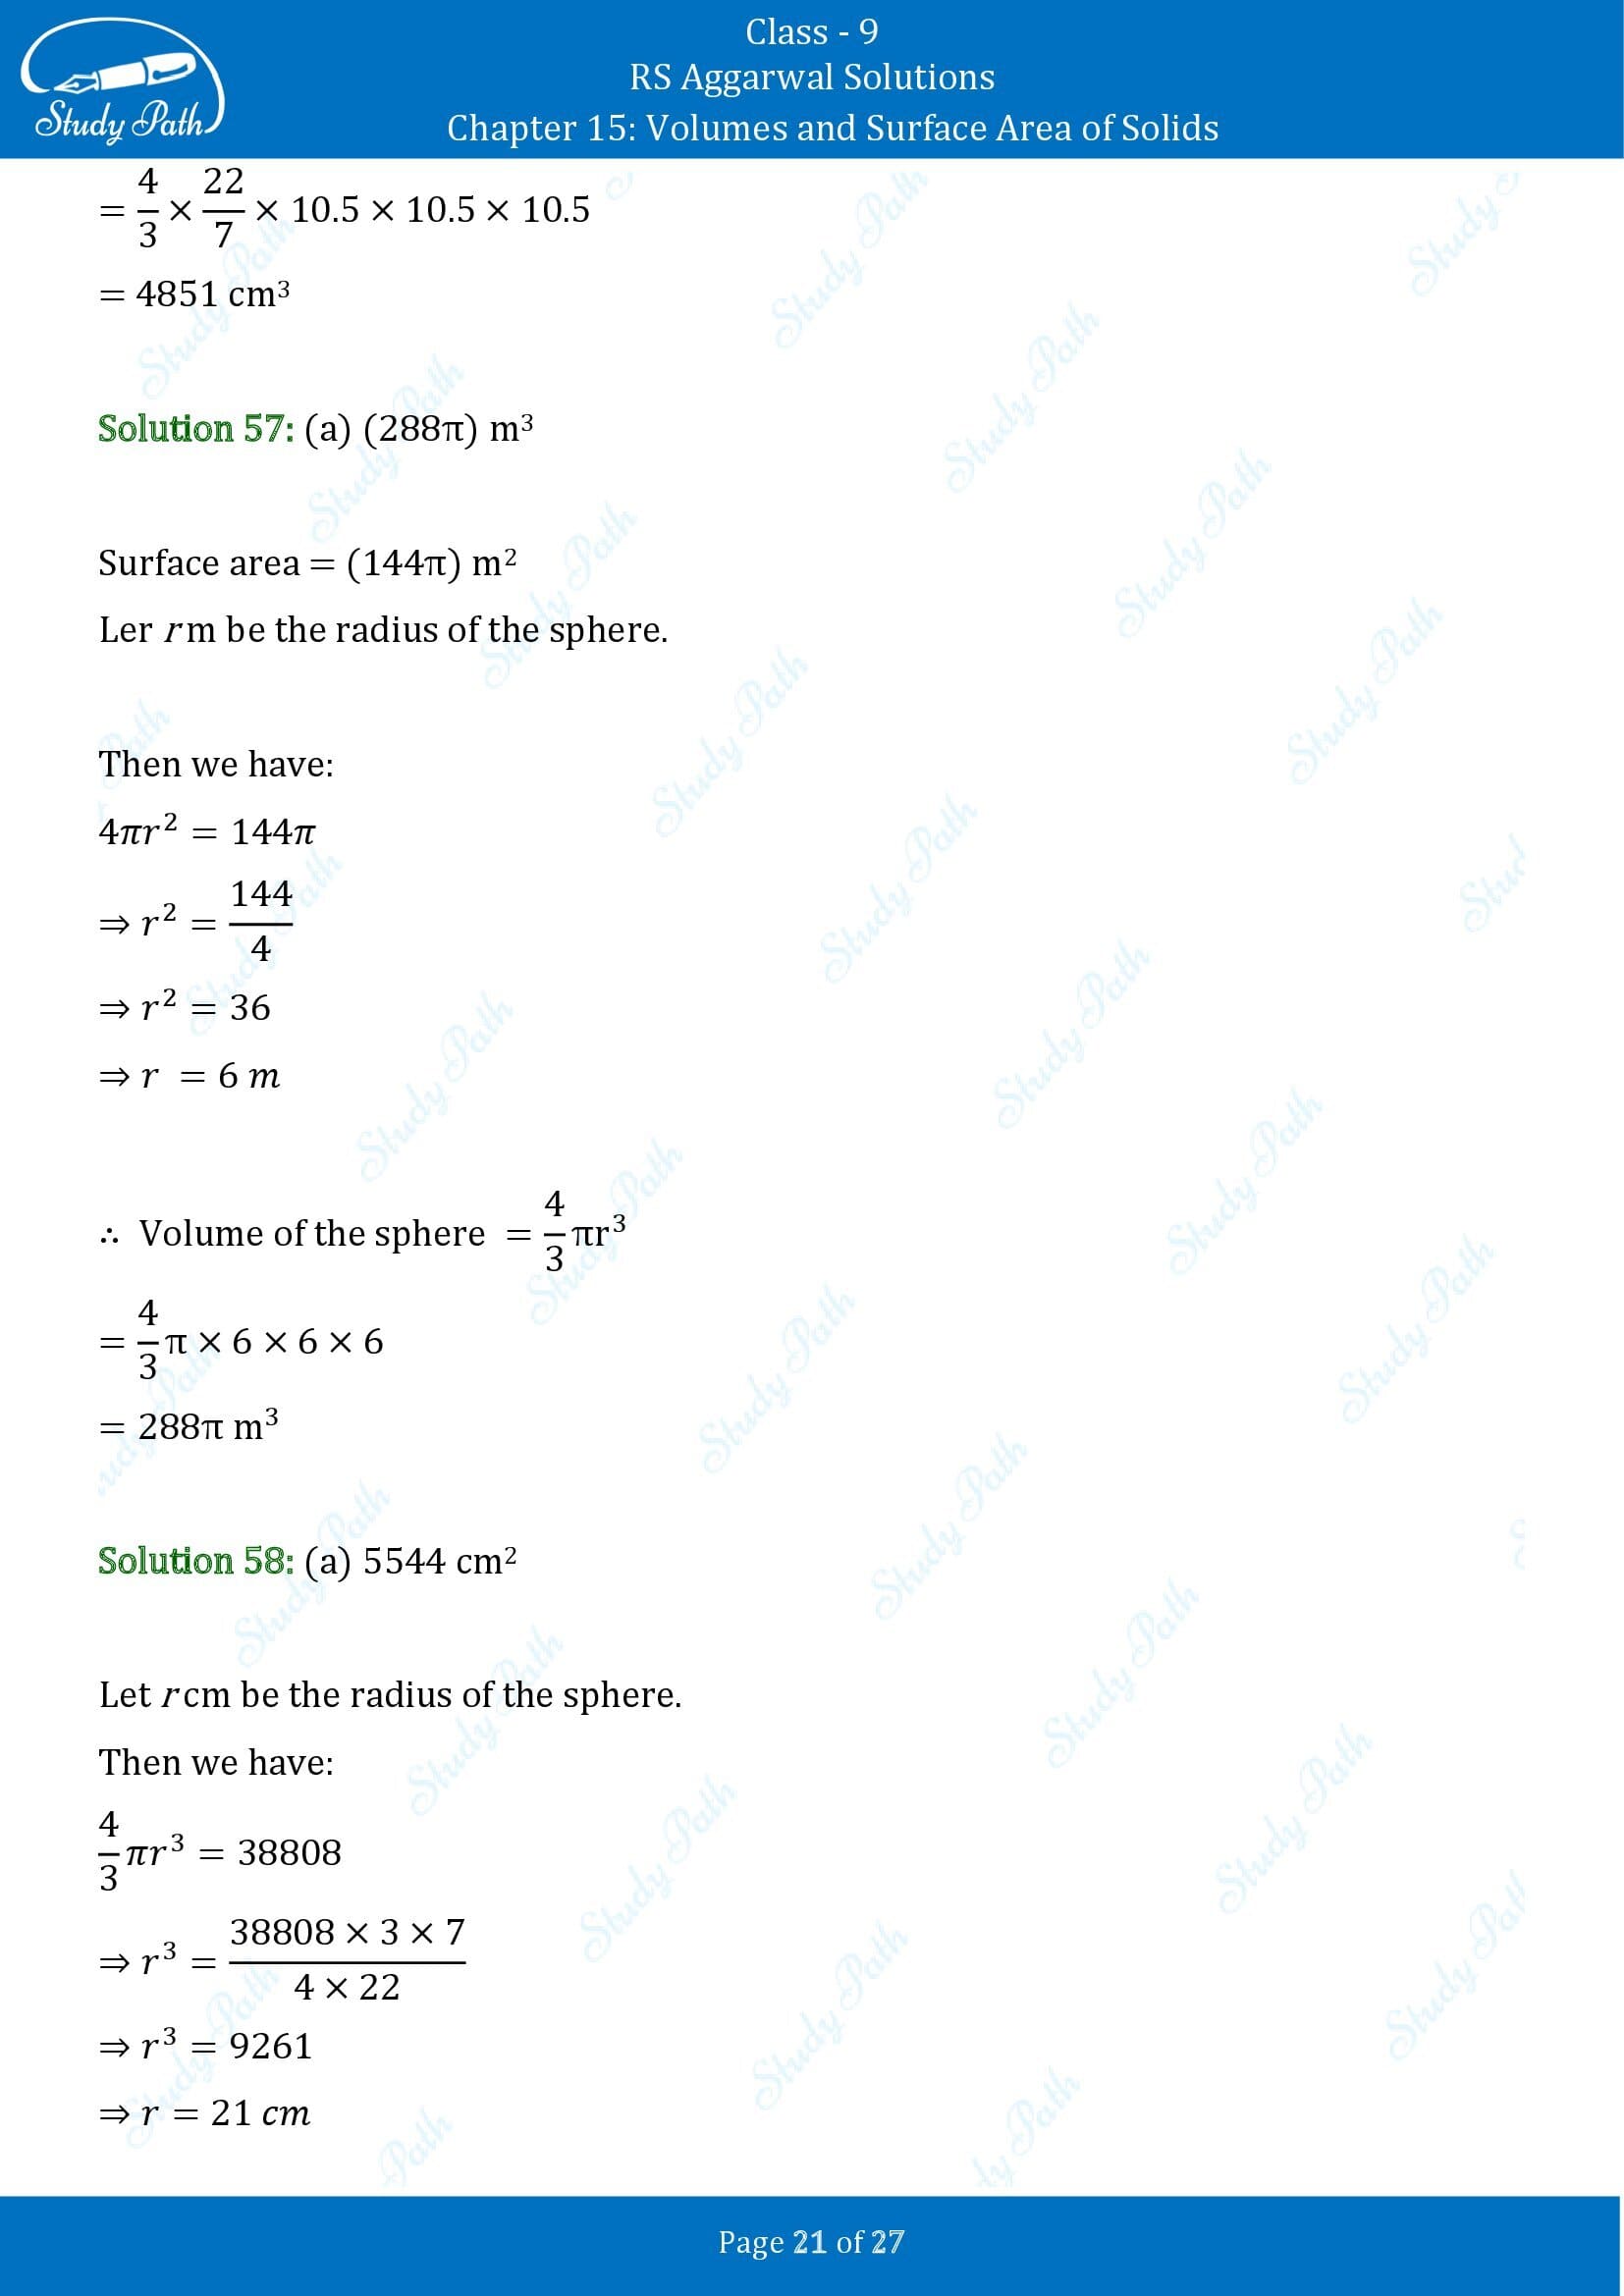 RS Aggarwal Solutions Class 9 Chapter 15 Volumes and Surface Area of Solids Multiple Choice Questions MCQs 00021